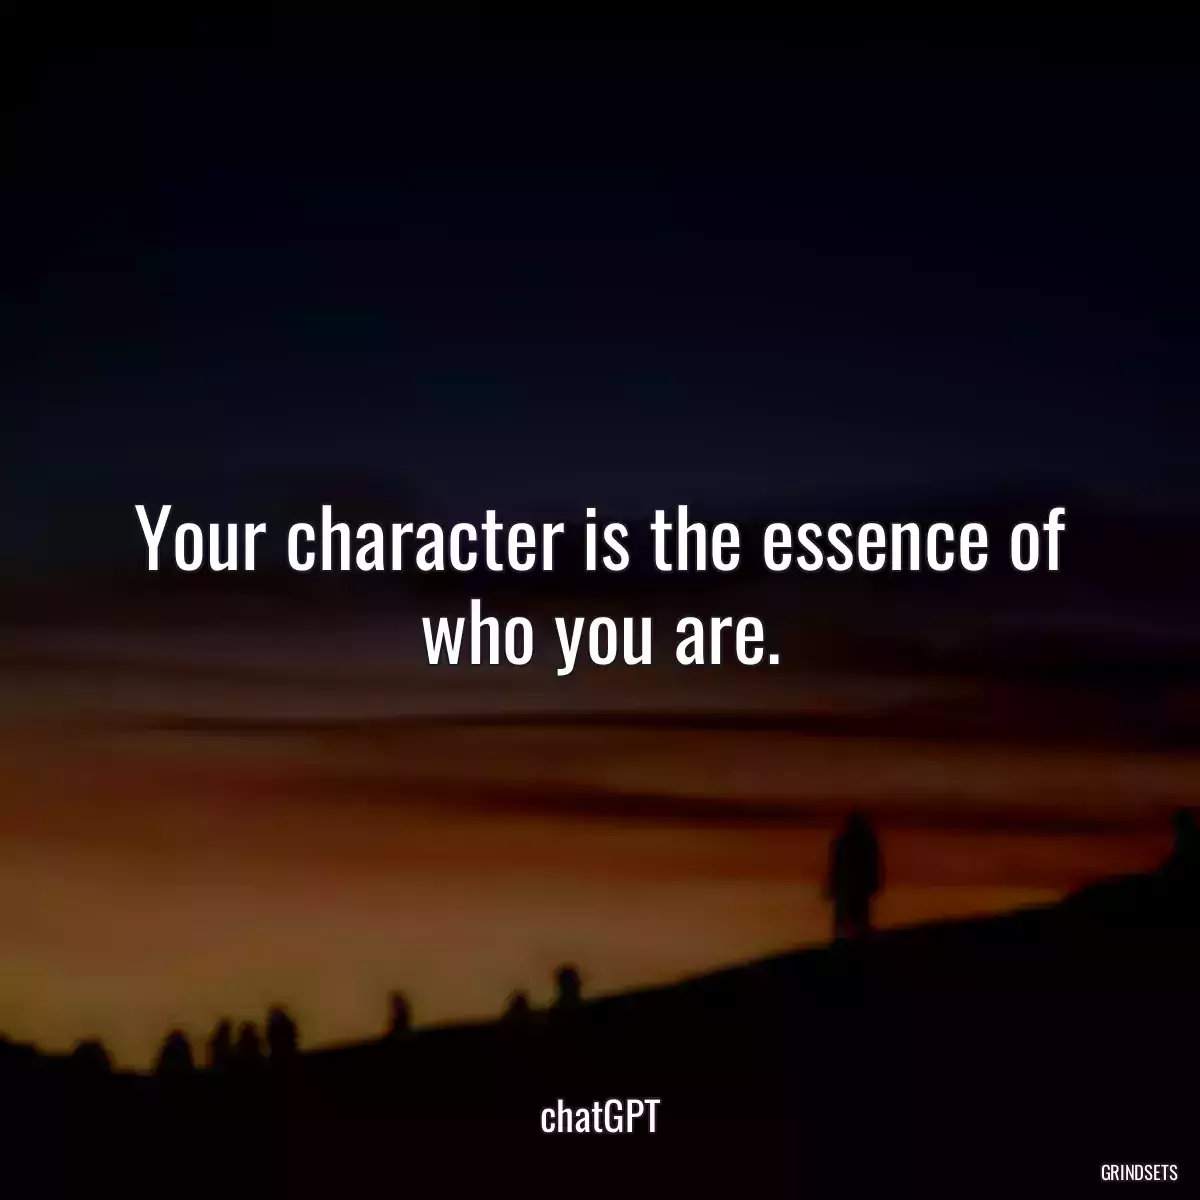 Your character is the essence of who you are.